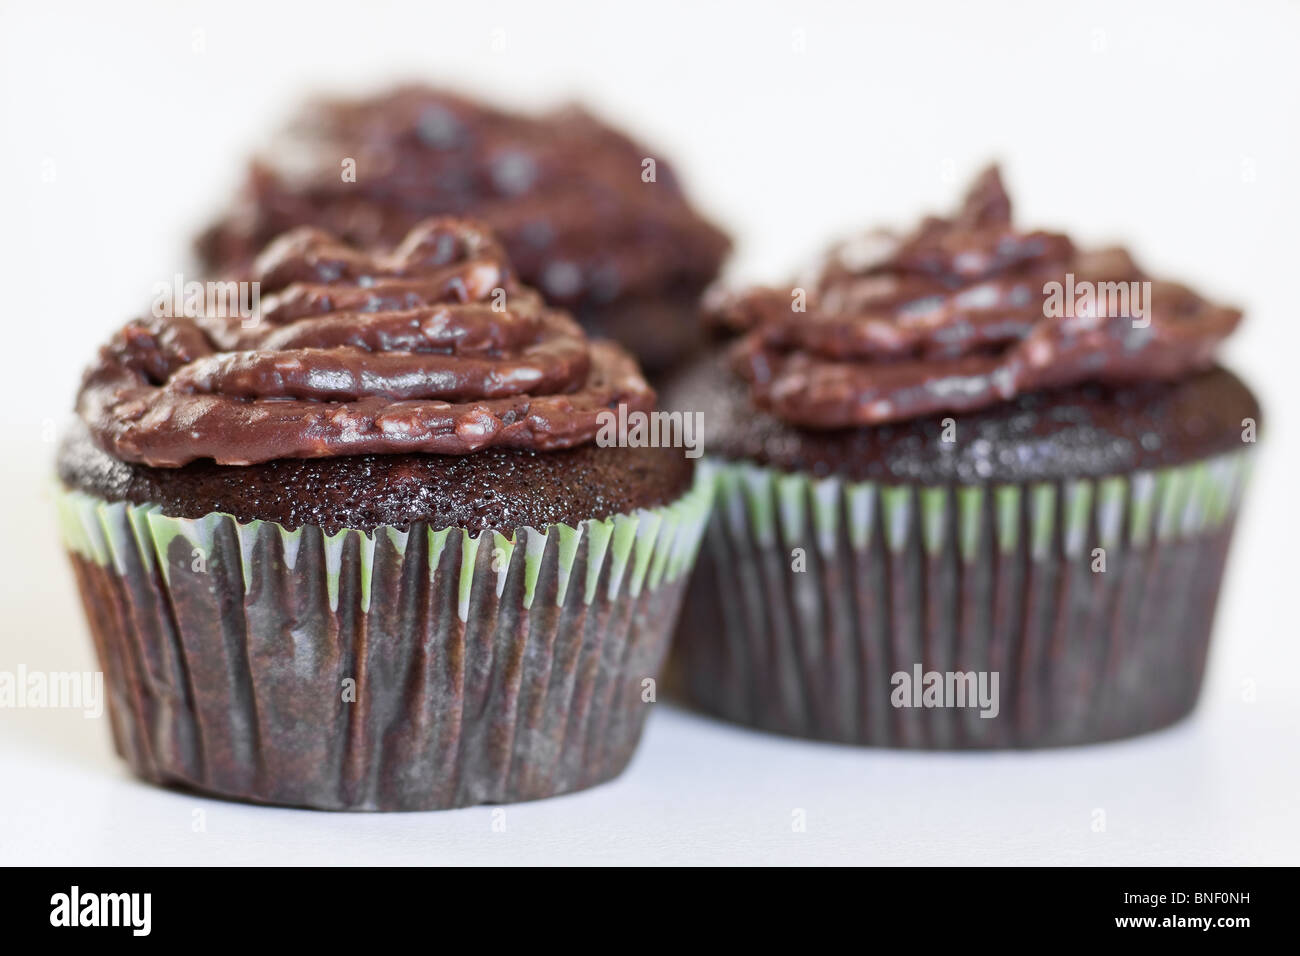 Homemade chocolate cupcakes on a white background. Stock Photo